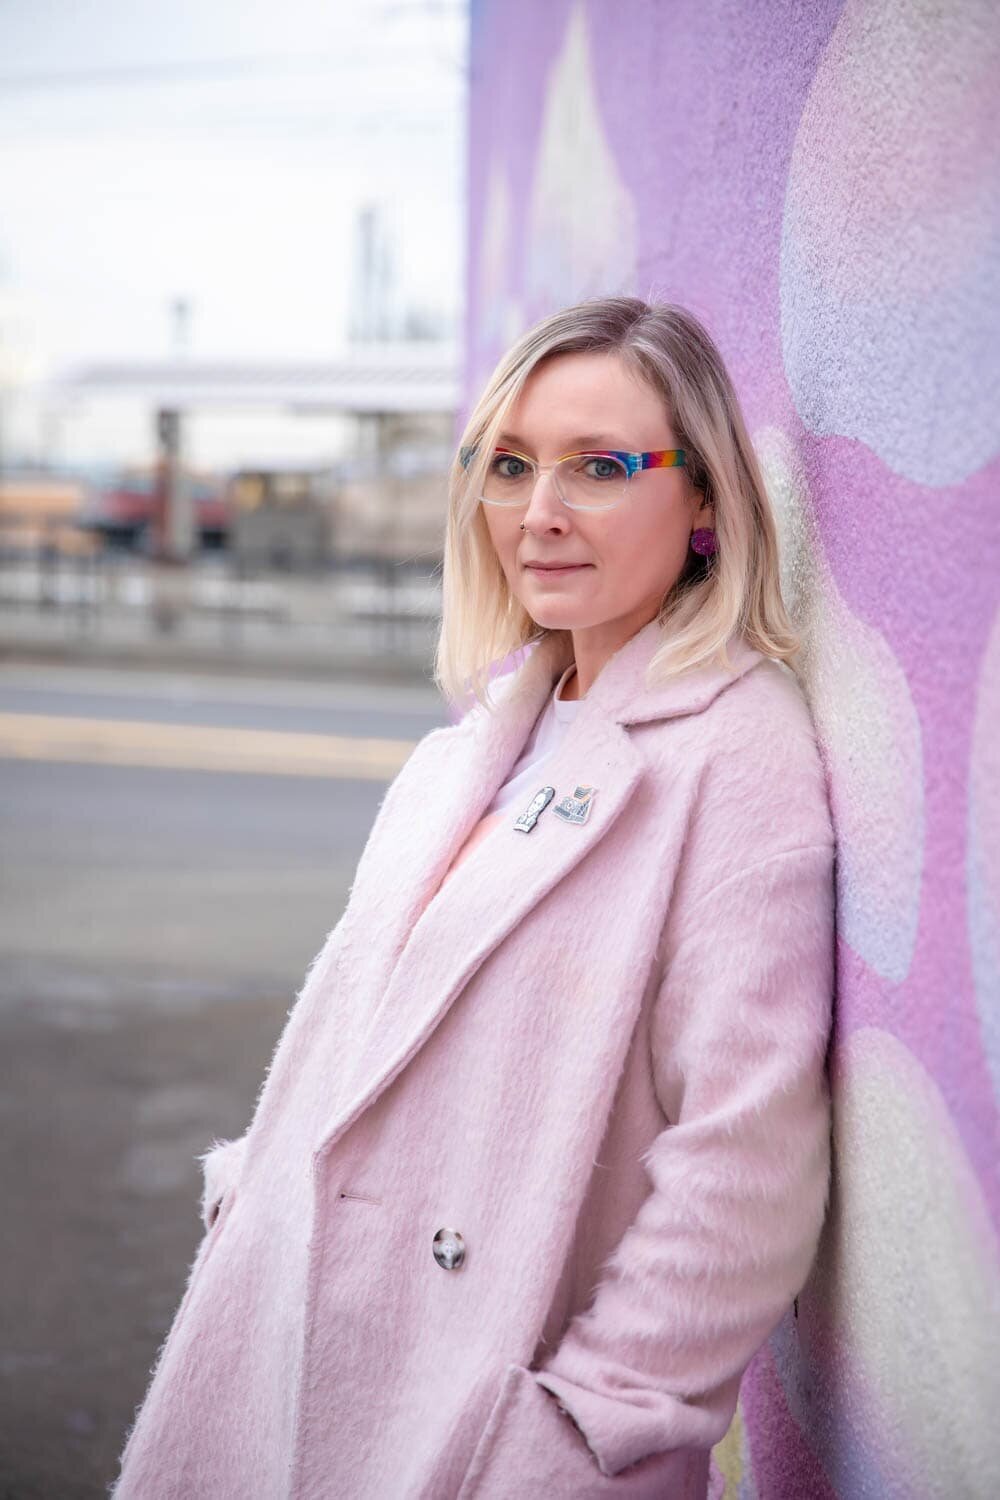 crystal genes photography wears a pink coat in front of a pink mural with clouds